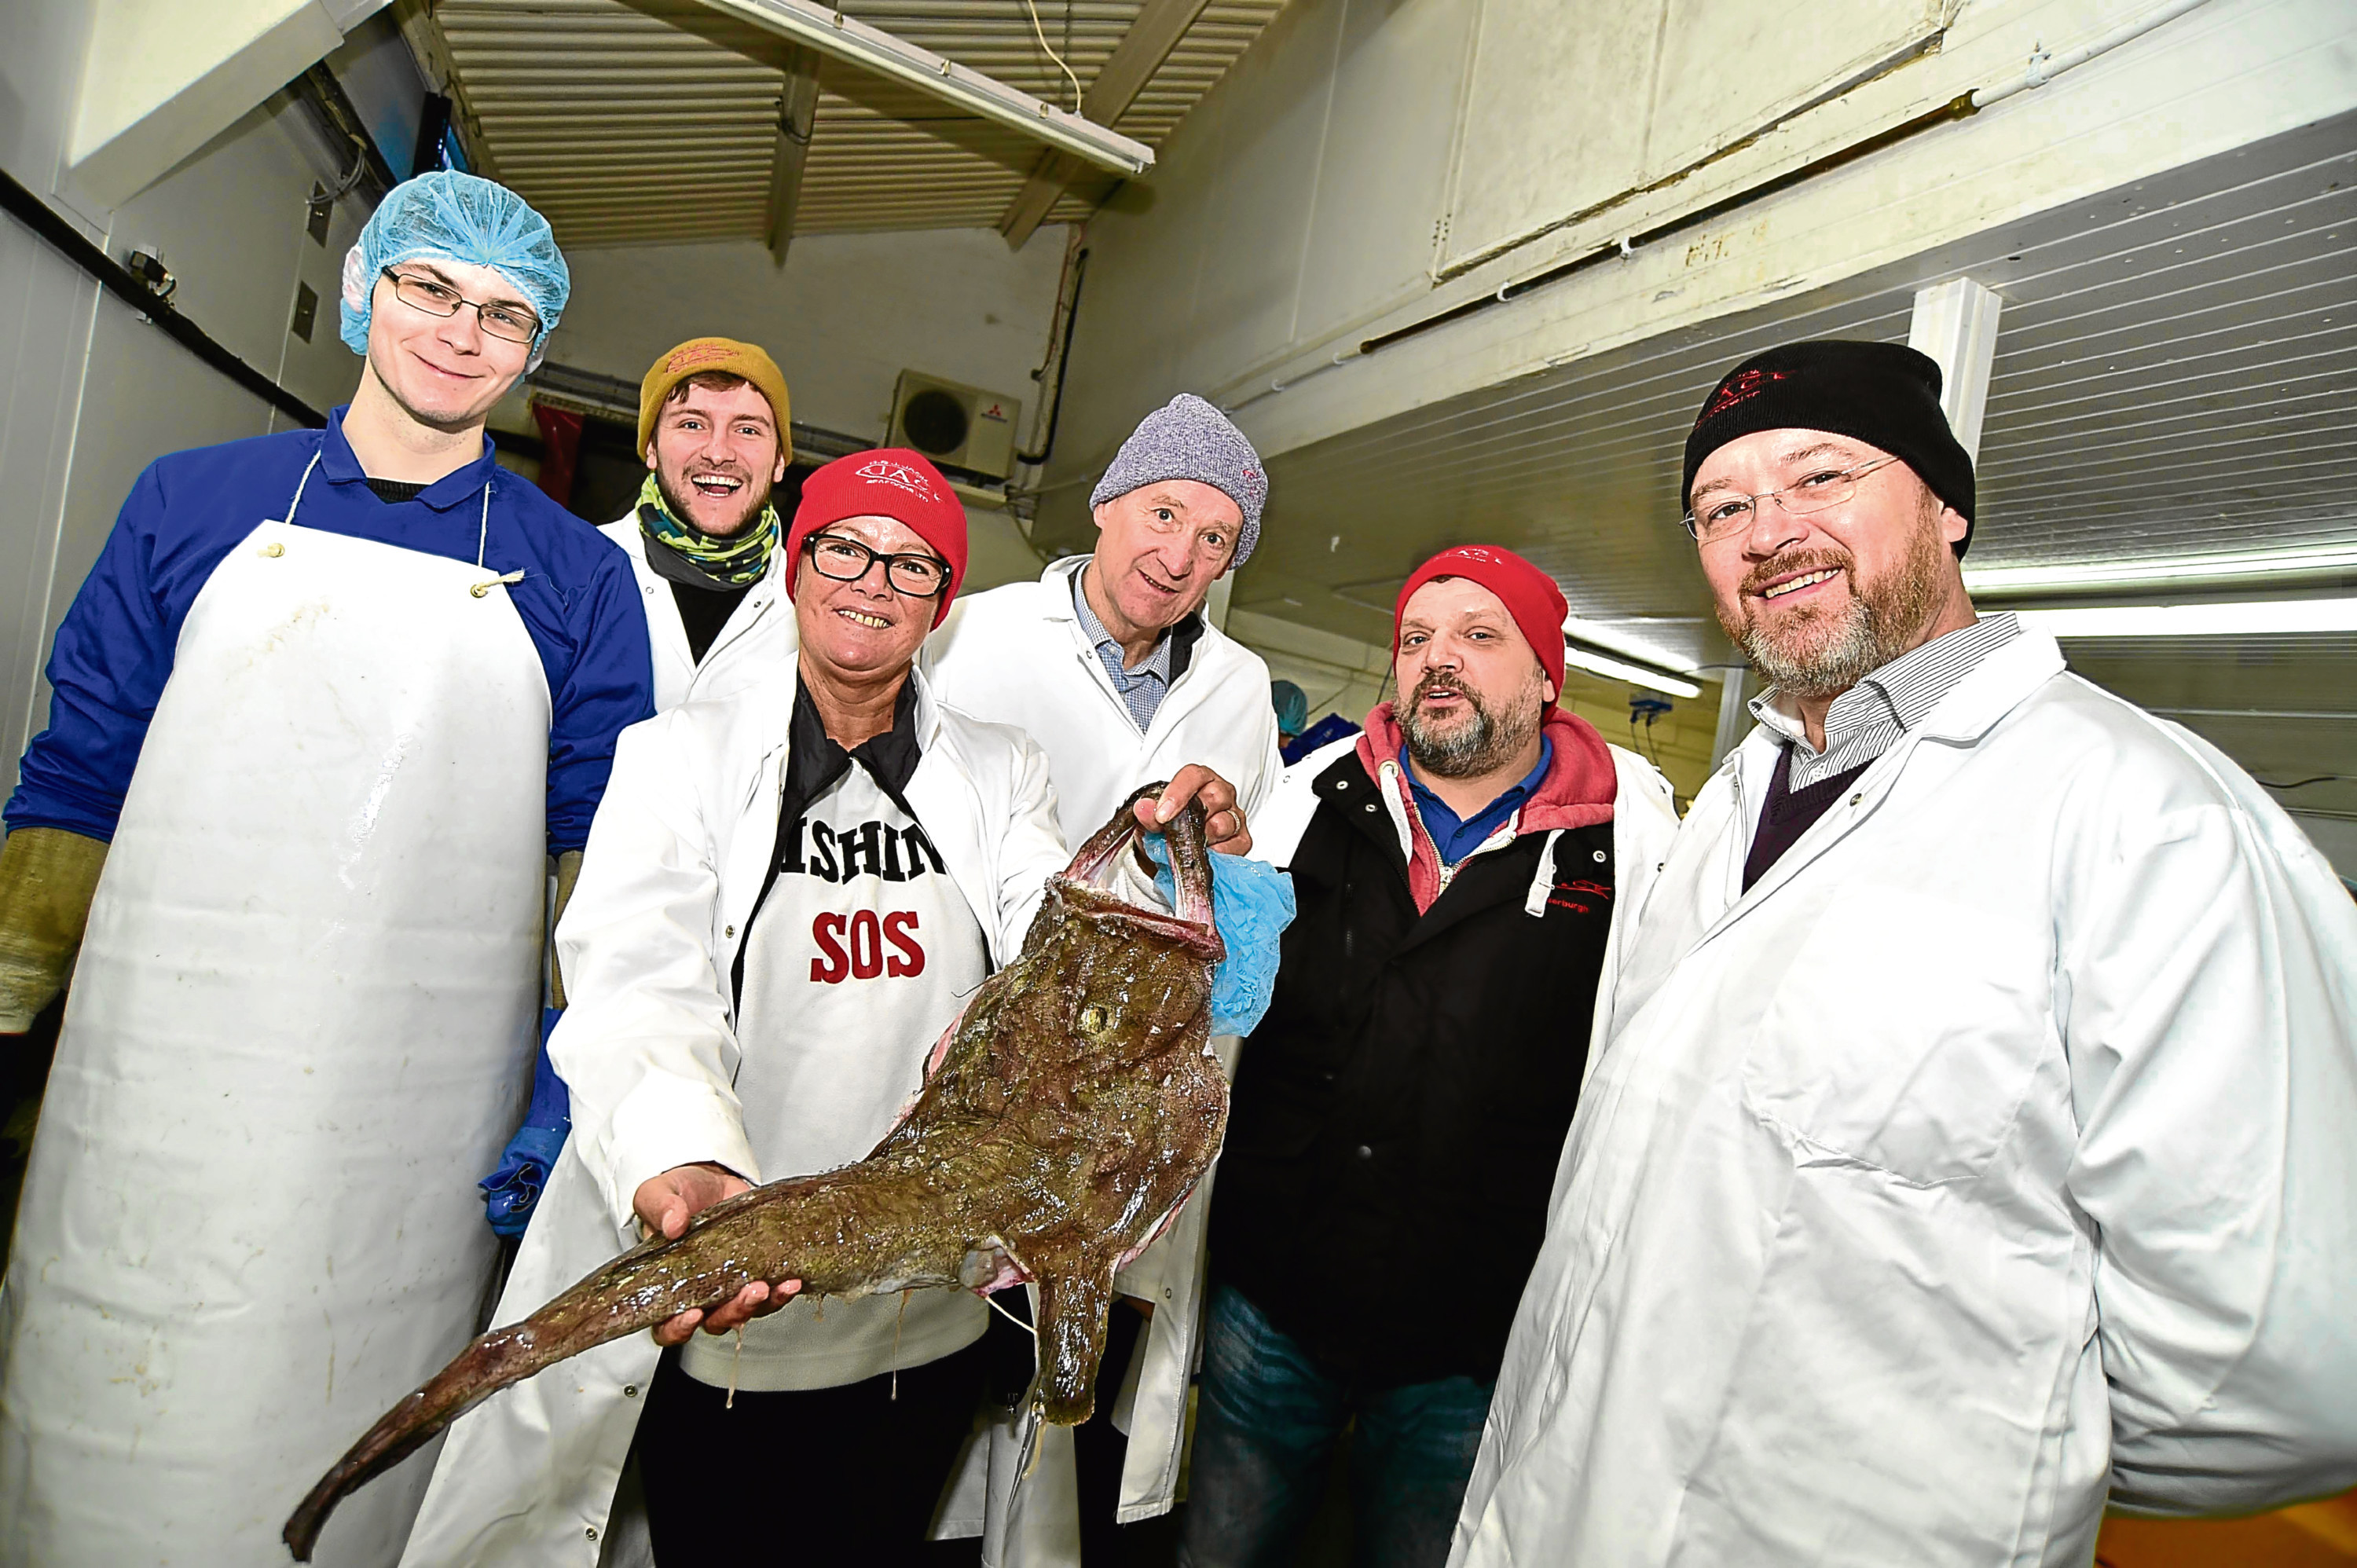 Carol MacDonald shows a monkfish during a tour of G&J Jack's fish processing plant in Fraserburgh.